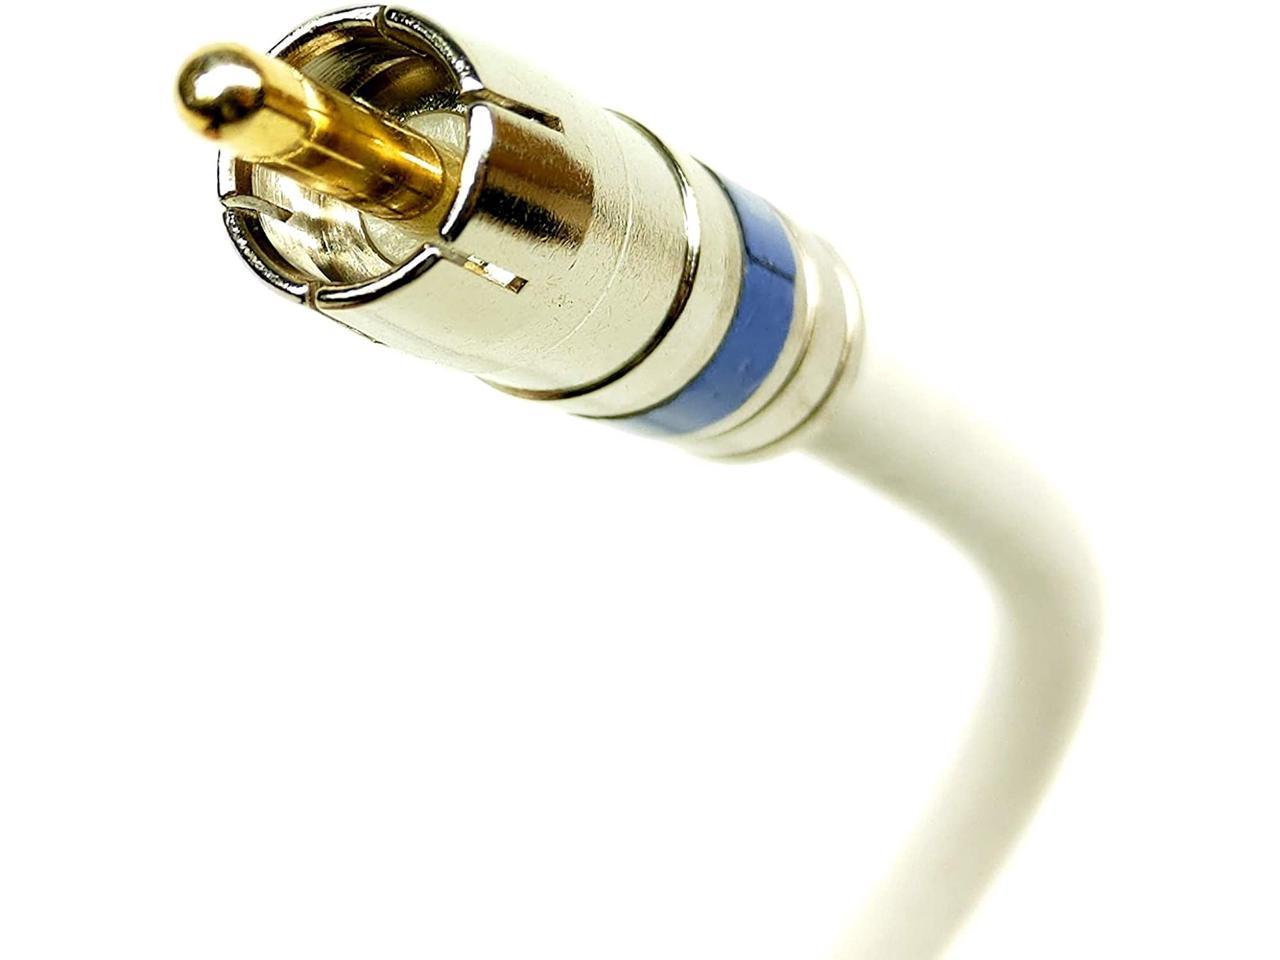 PSI - RCA Audio Cable, Bare Copper 18 AWG Solid Core Center Conductor, Gold Plated Pin, Brass Fittings, Bi-Shield 60% Braid 100% Foil, Custom Cut and Assembled in USA (1 - 50 feet, White)